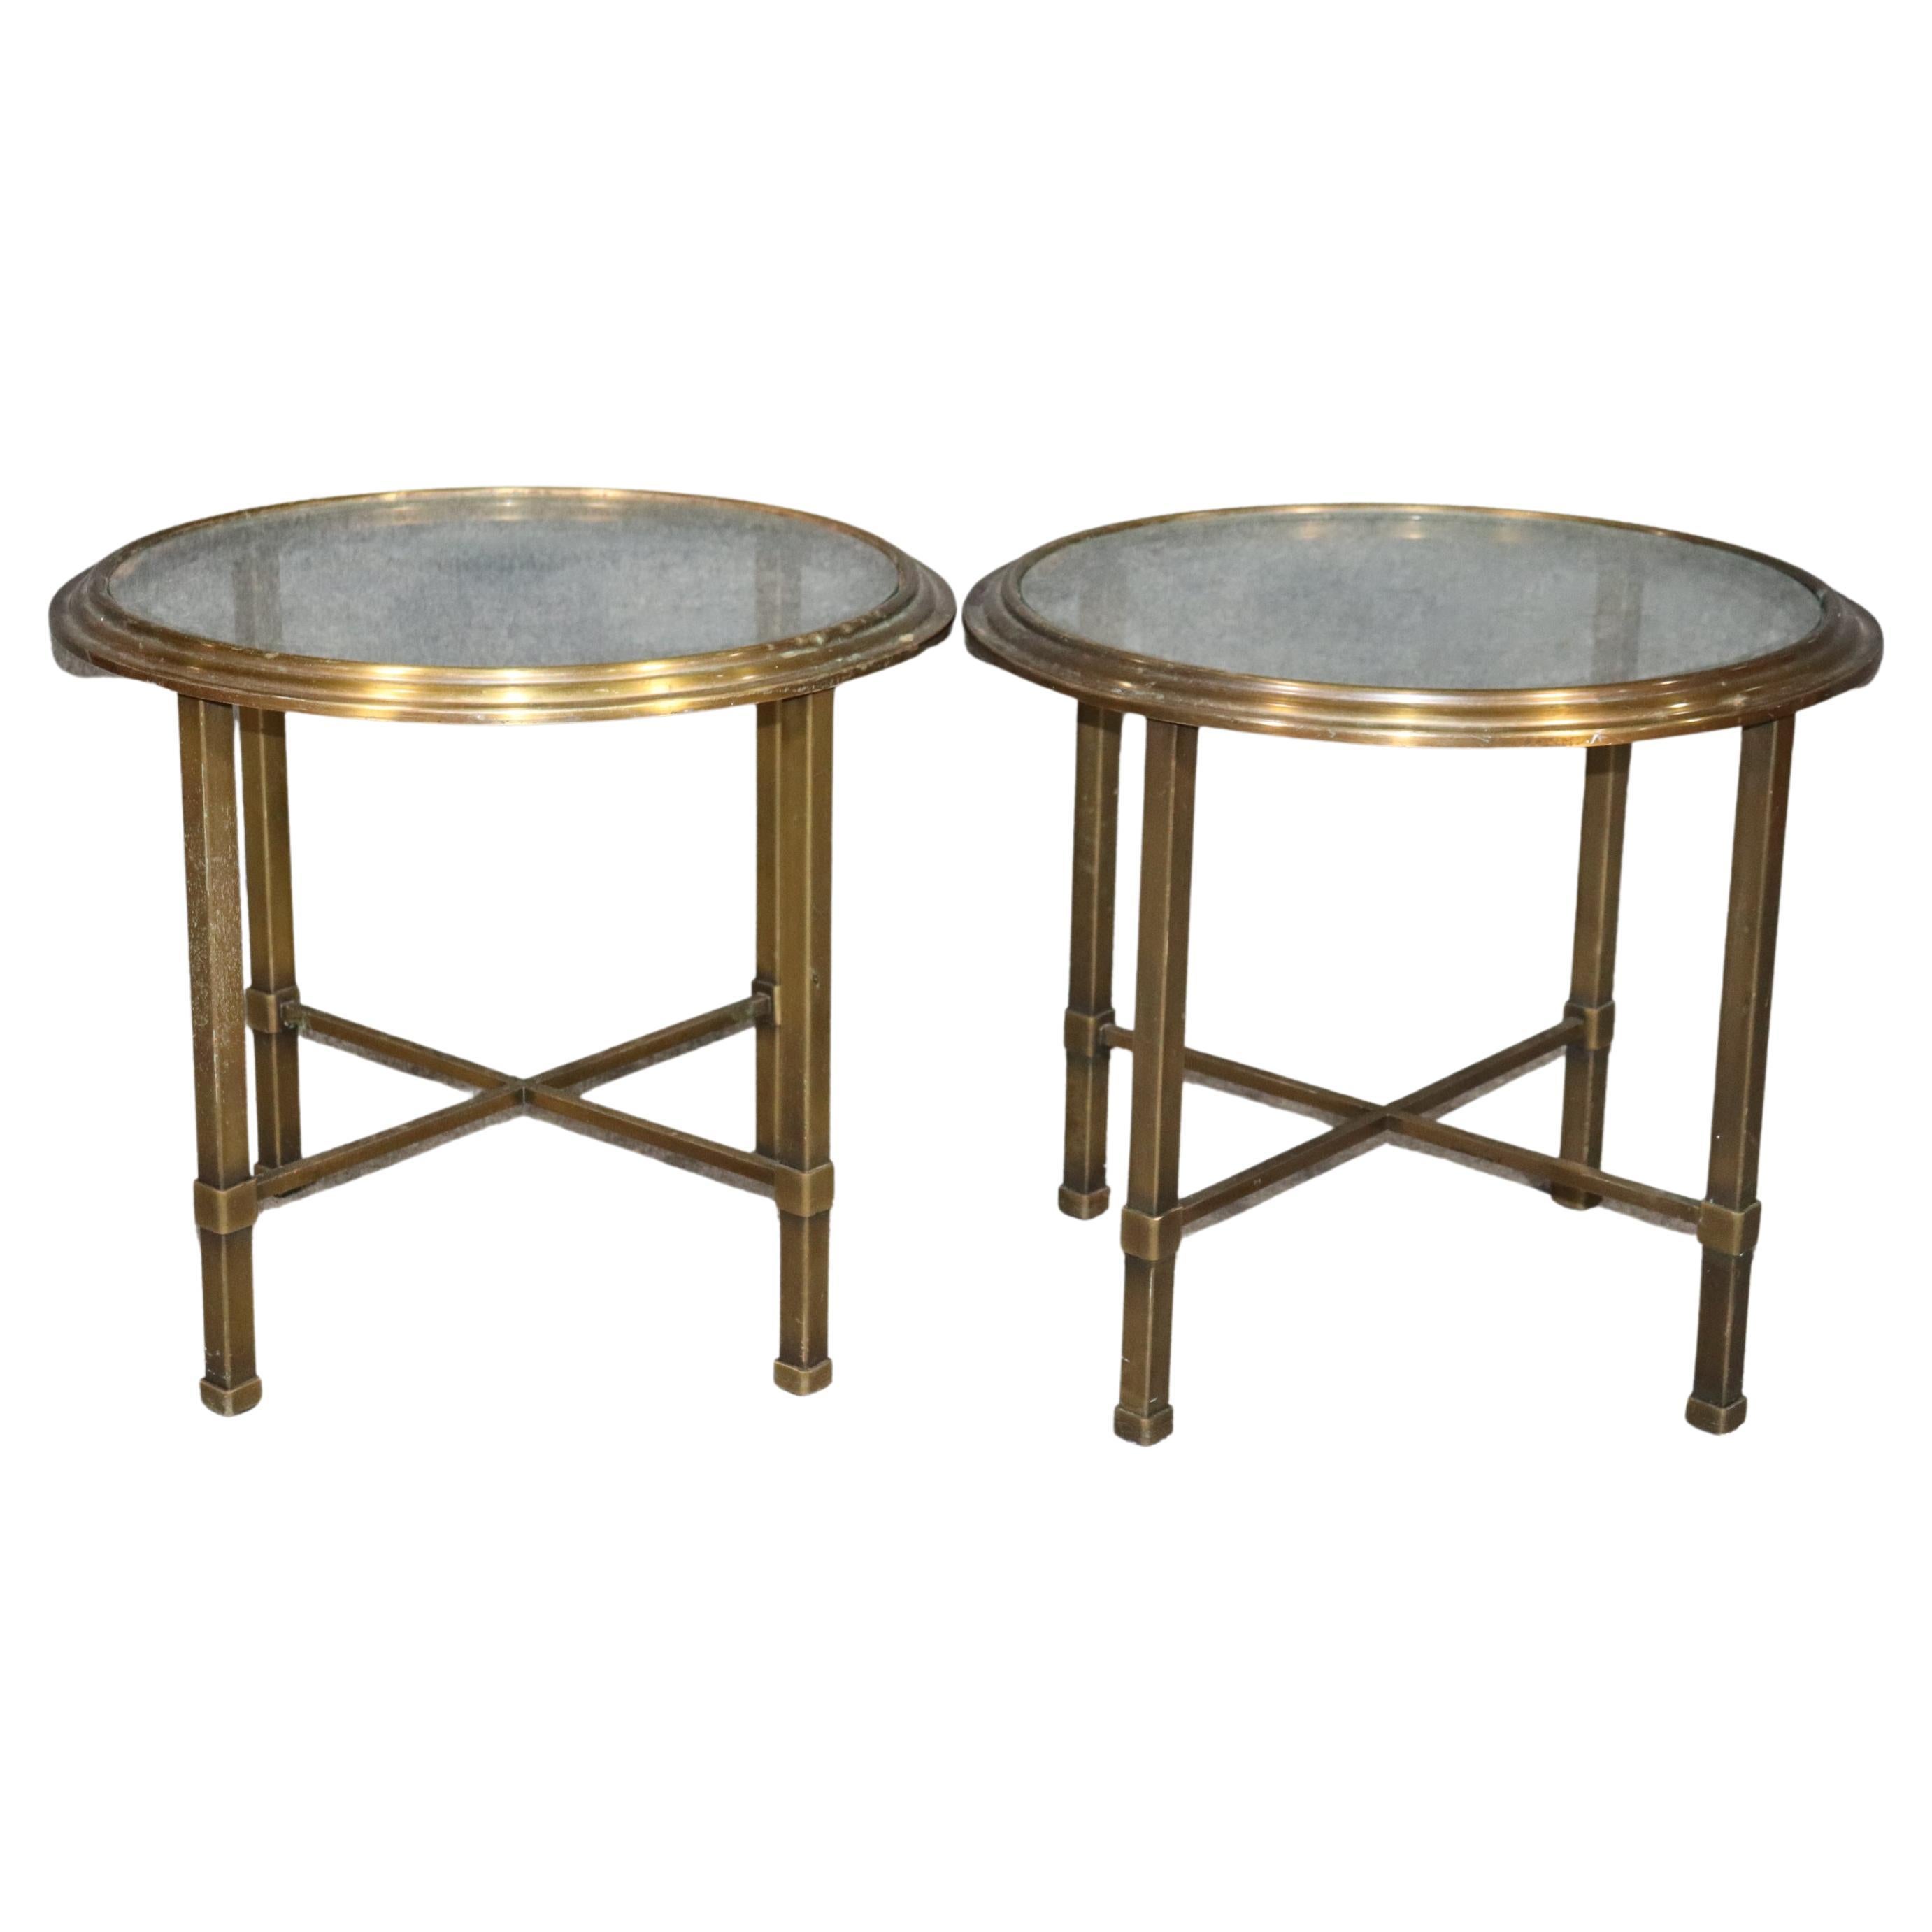 Pair of Mid-Century Modern Brass and Glass Mastercraft Style Round End Tables